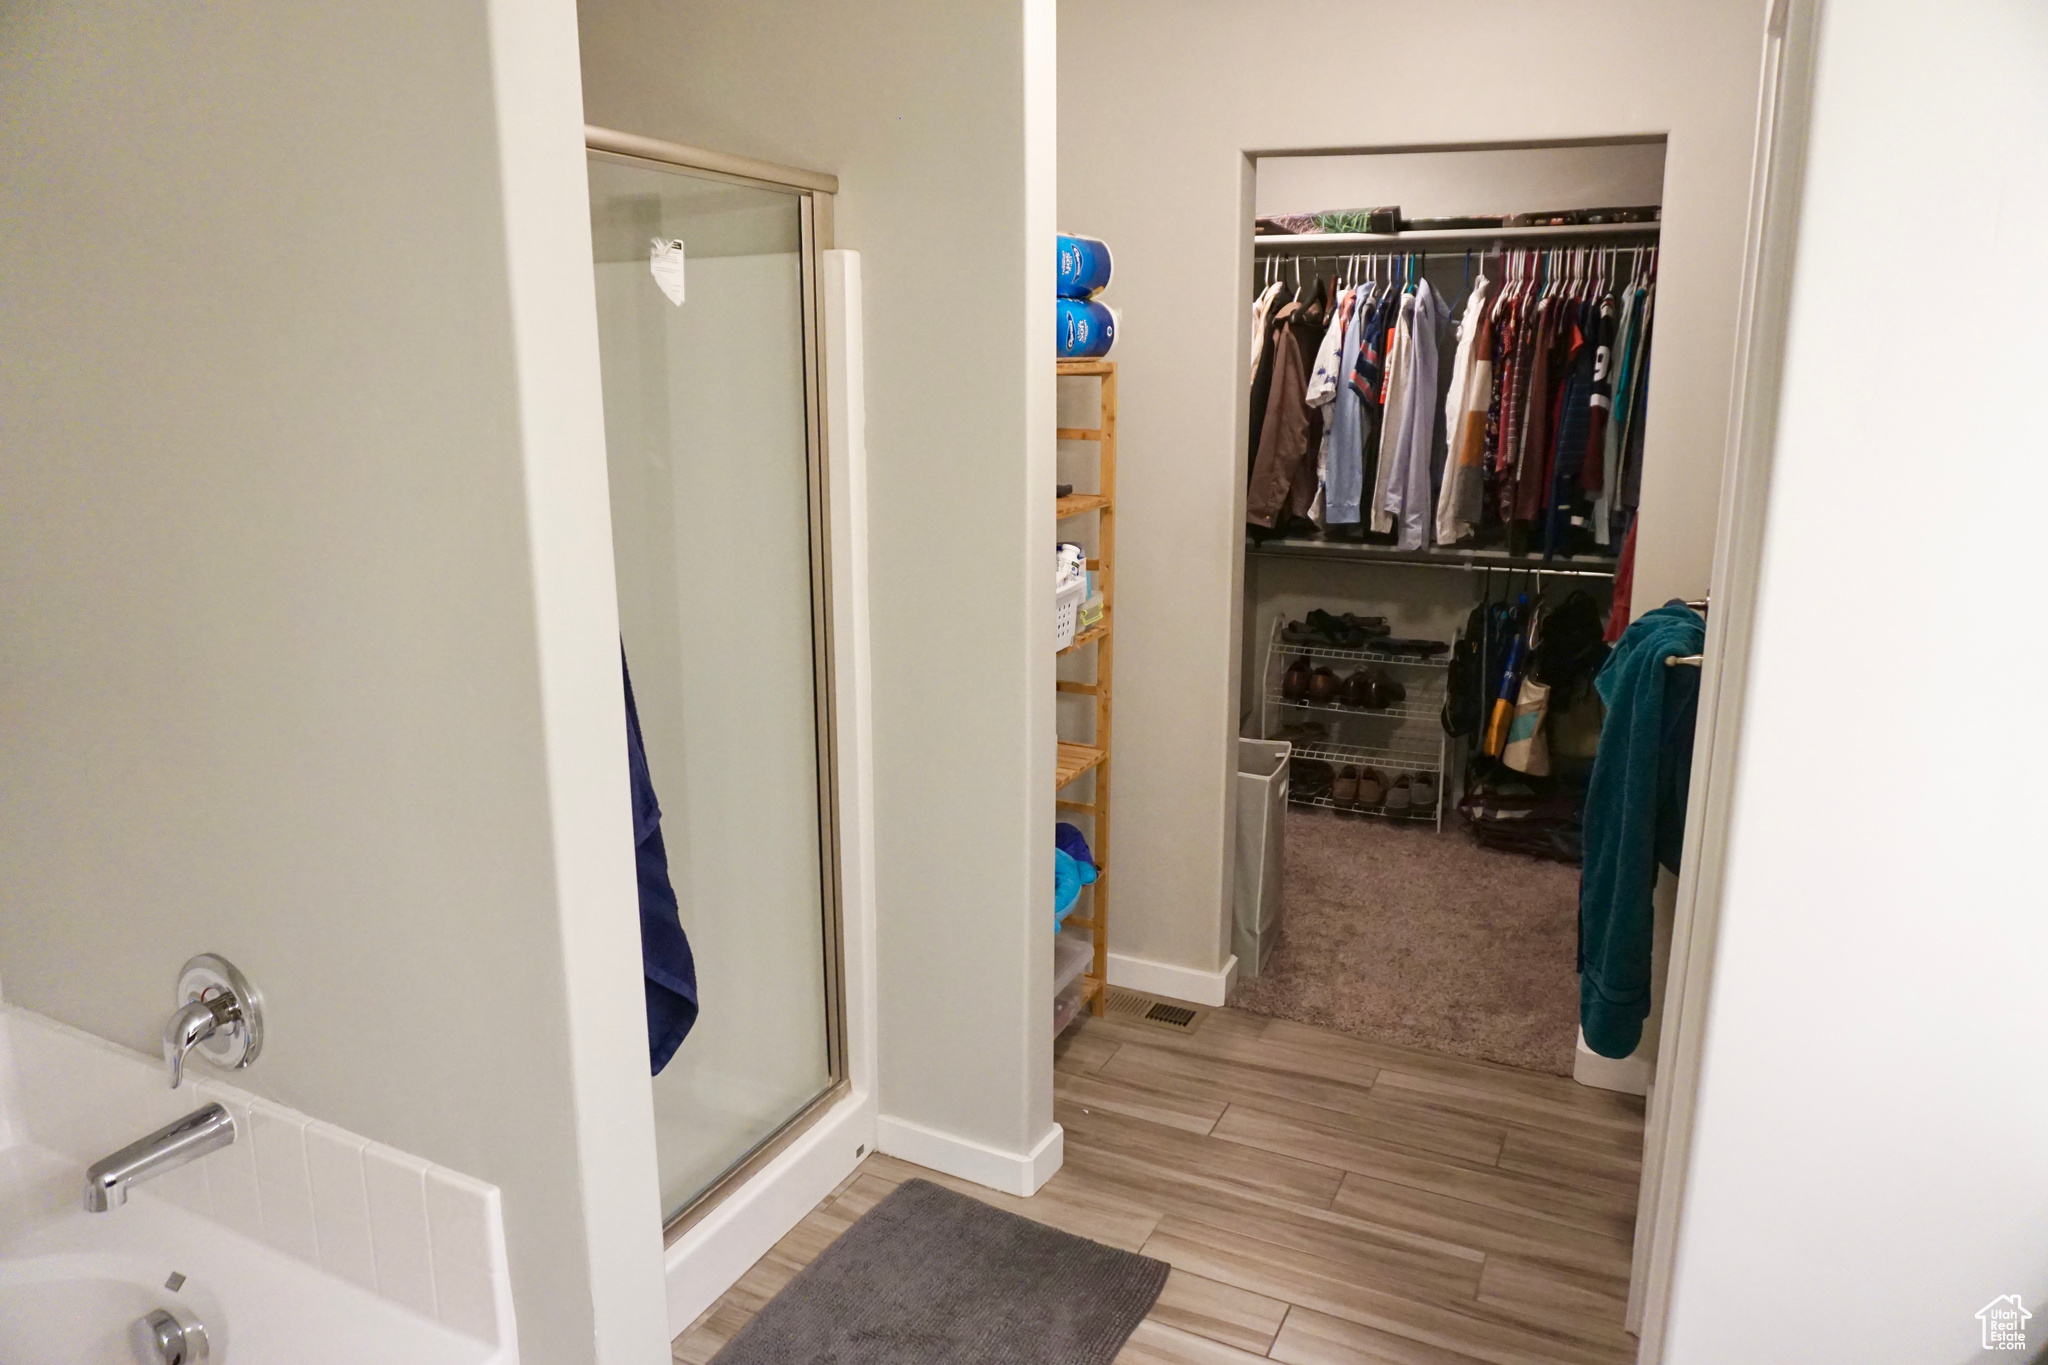 Primary bathroom featuring a shower, separate tub, and walk-in closet